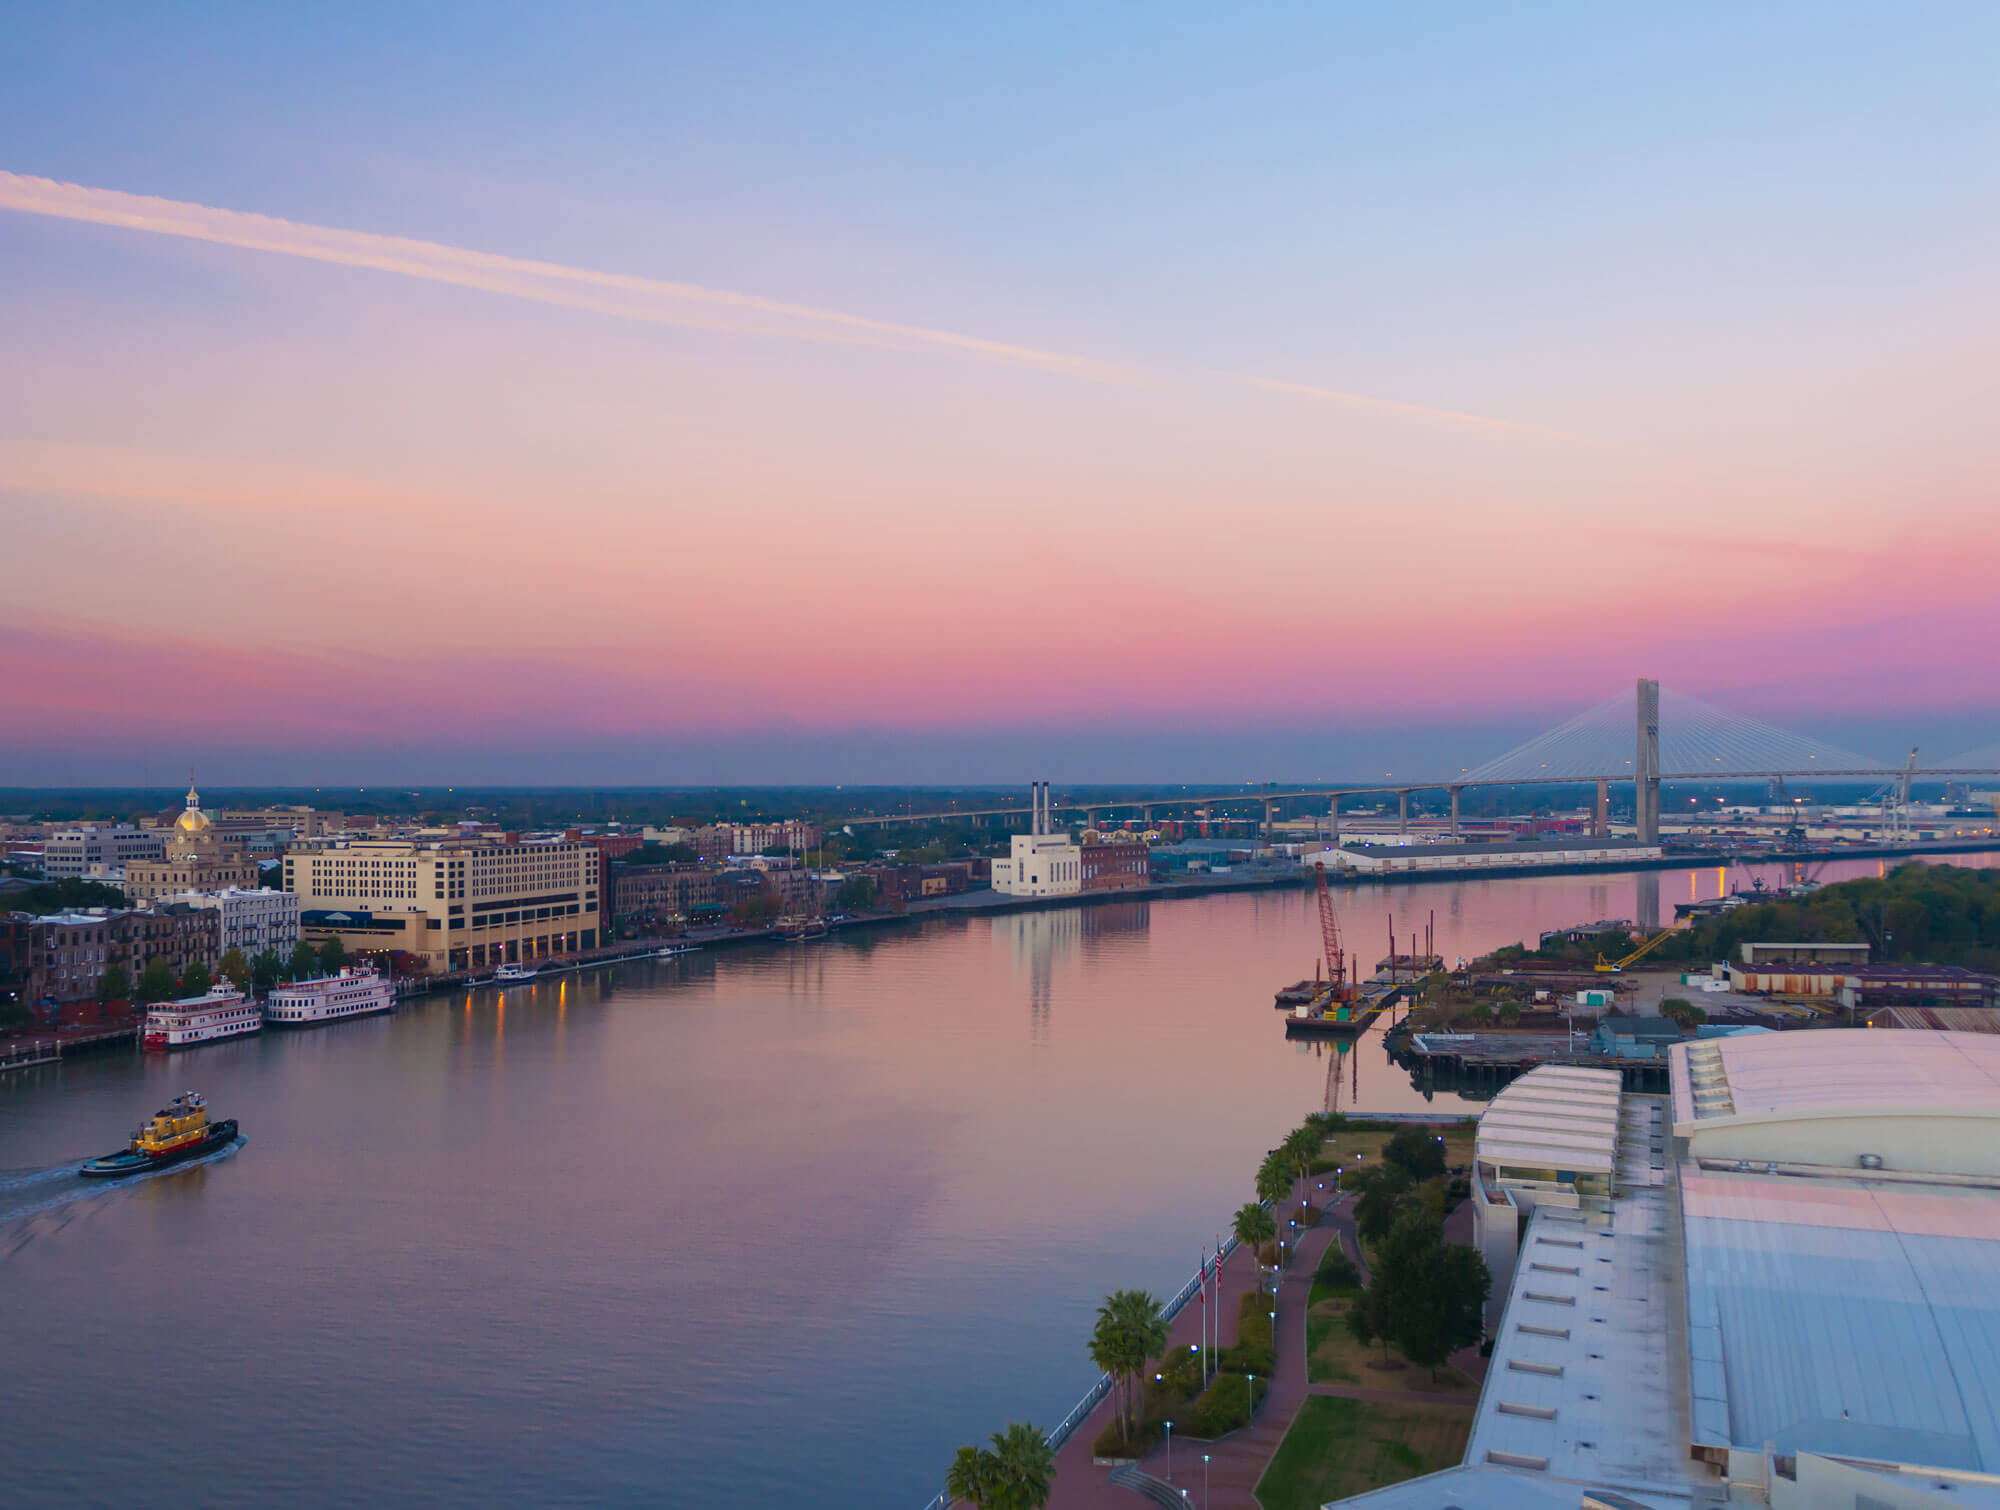 A view of the Savannah River at dusk with the Talmadge Memorial Bridge in the background